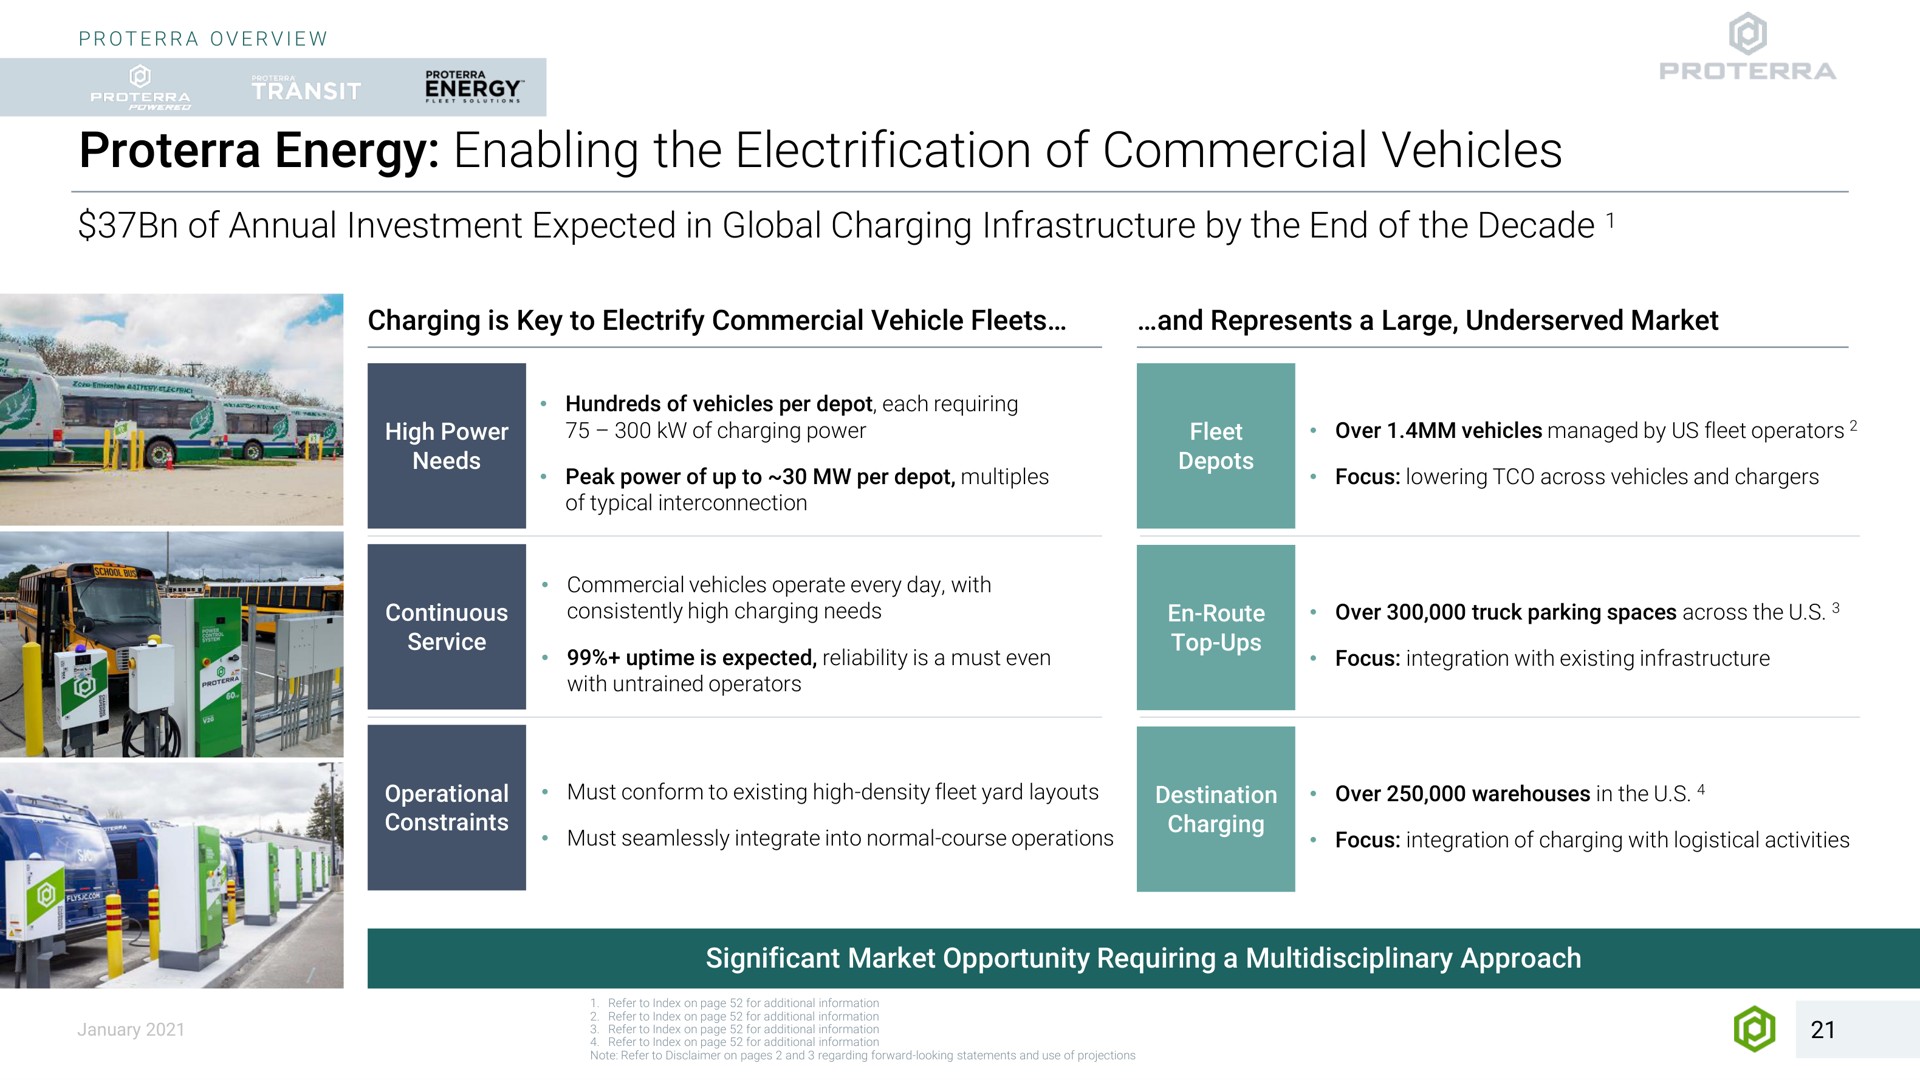 energy enabling the electrification of commercial vehicles annual investment expected in global charging infrastructure by end decade a charging is key to electrify vehicle fleets and represents a large market high power needs hundreds per depot each requiring charging power peak power up to per depot multiples typical interconnection service operate every day with is expected reliability is a must even with untrained operators top ups over managed by us fleet operators focus lowering across and chargers focus integration with existing infrastructure oxen tal must seamlessly integrate into normal course operations charging focus integration charging with logistical activities significant market opportunity requiring a approach | Proterra